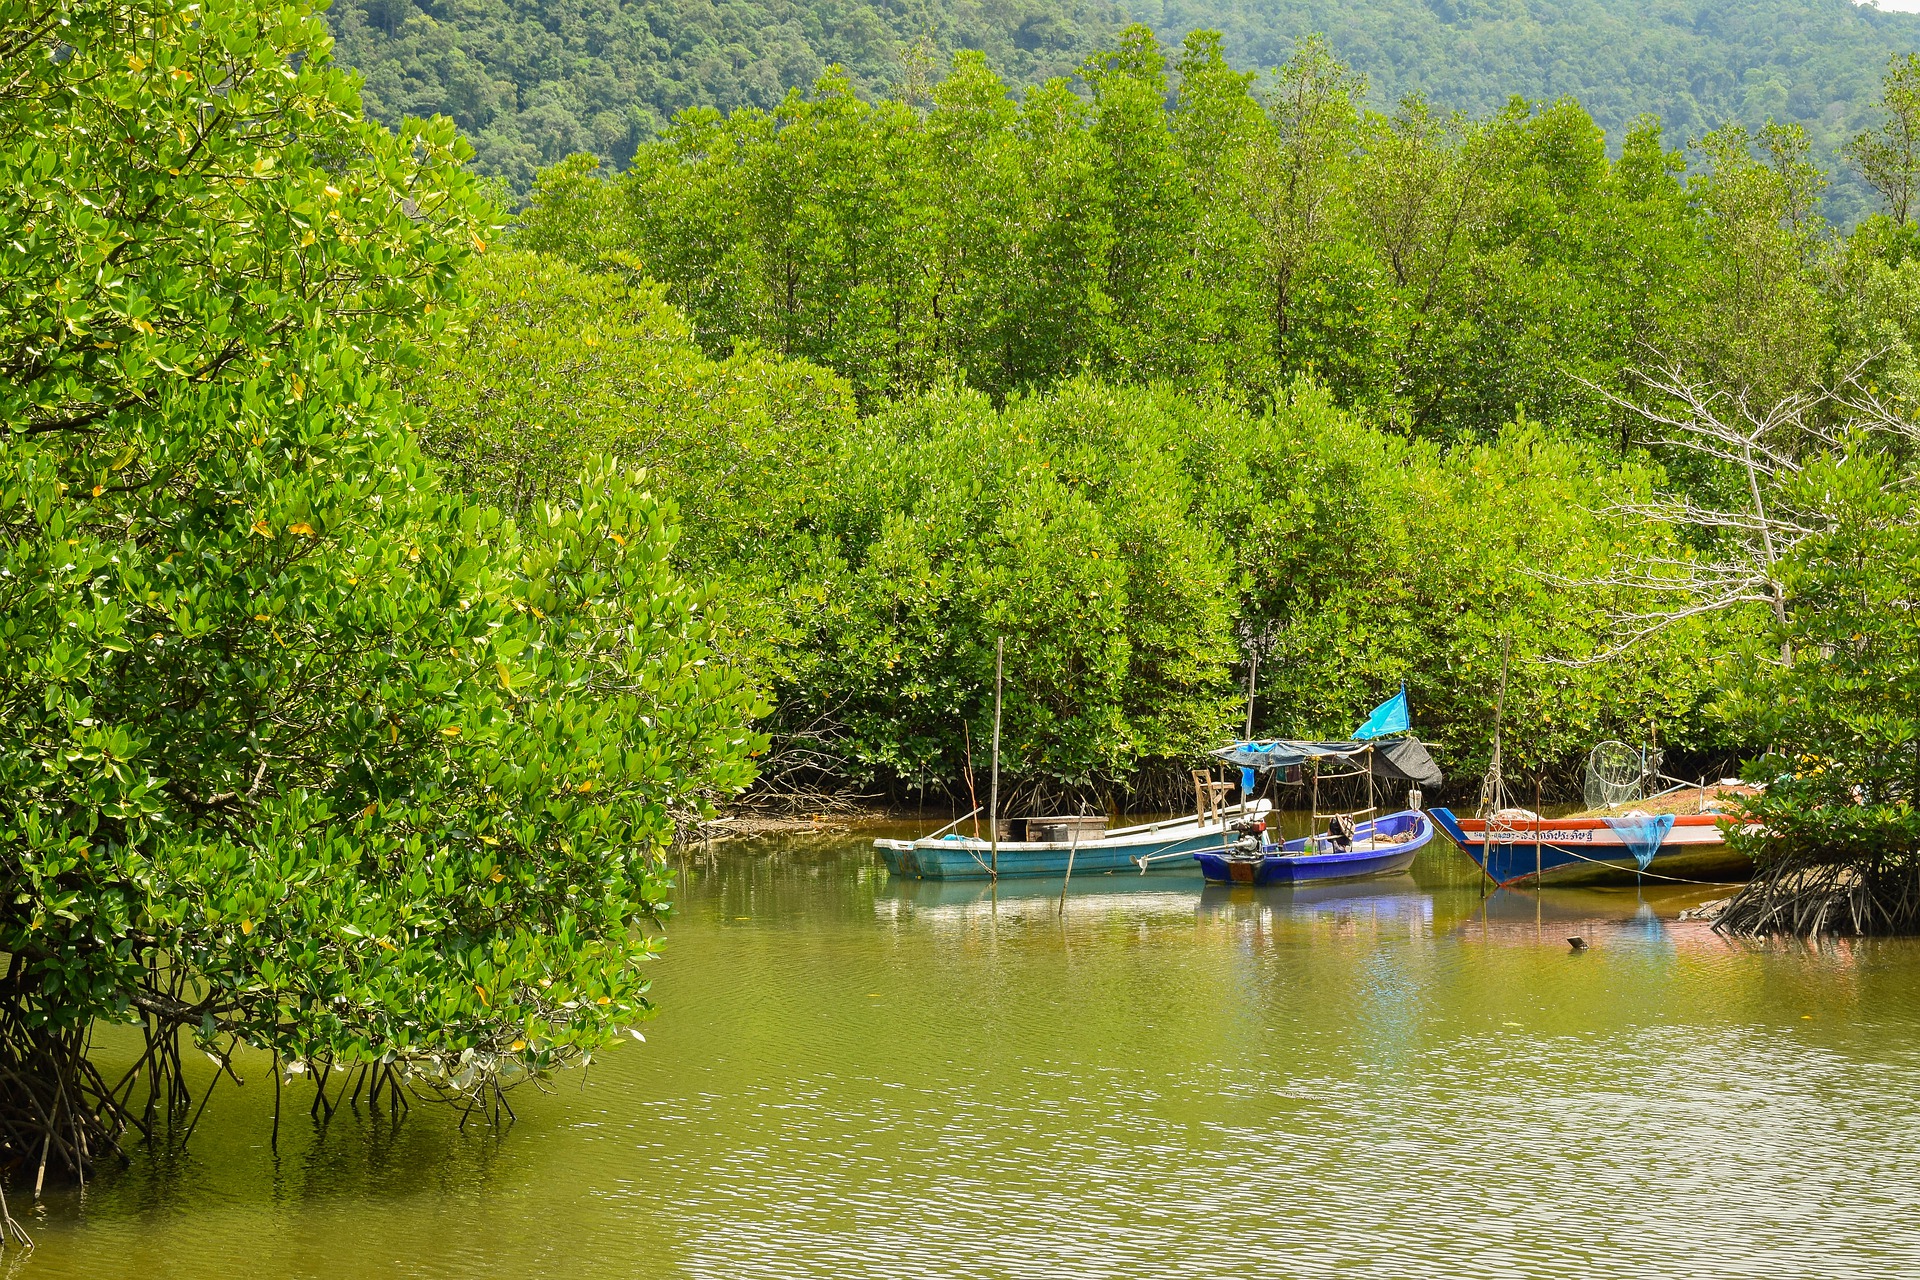 Mangrove forest in Thailand.